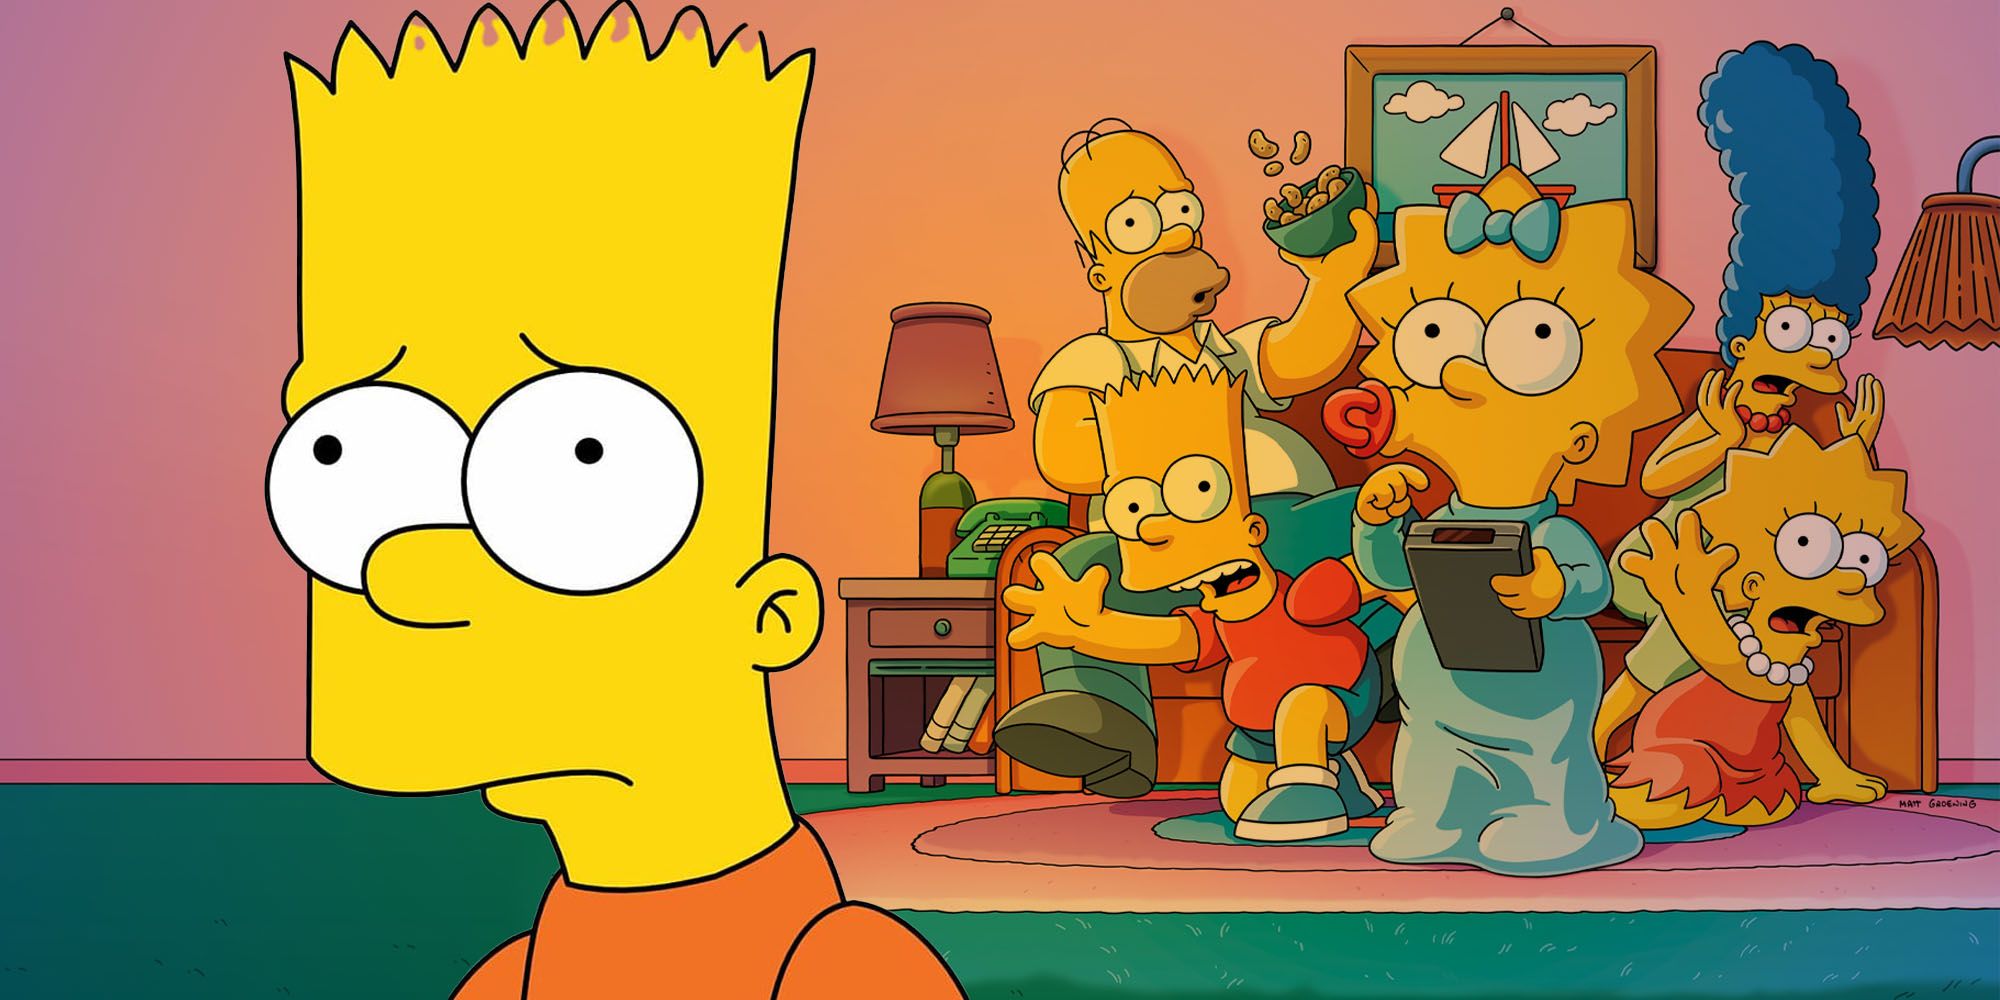 Sad Bart Simpson and The Simpsons family